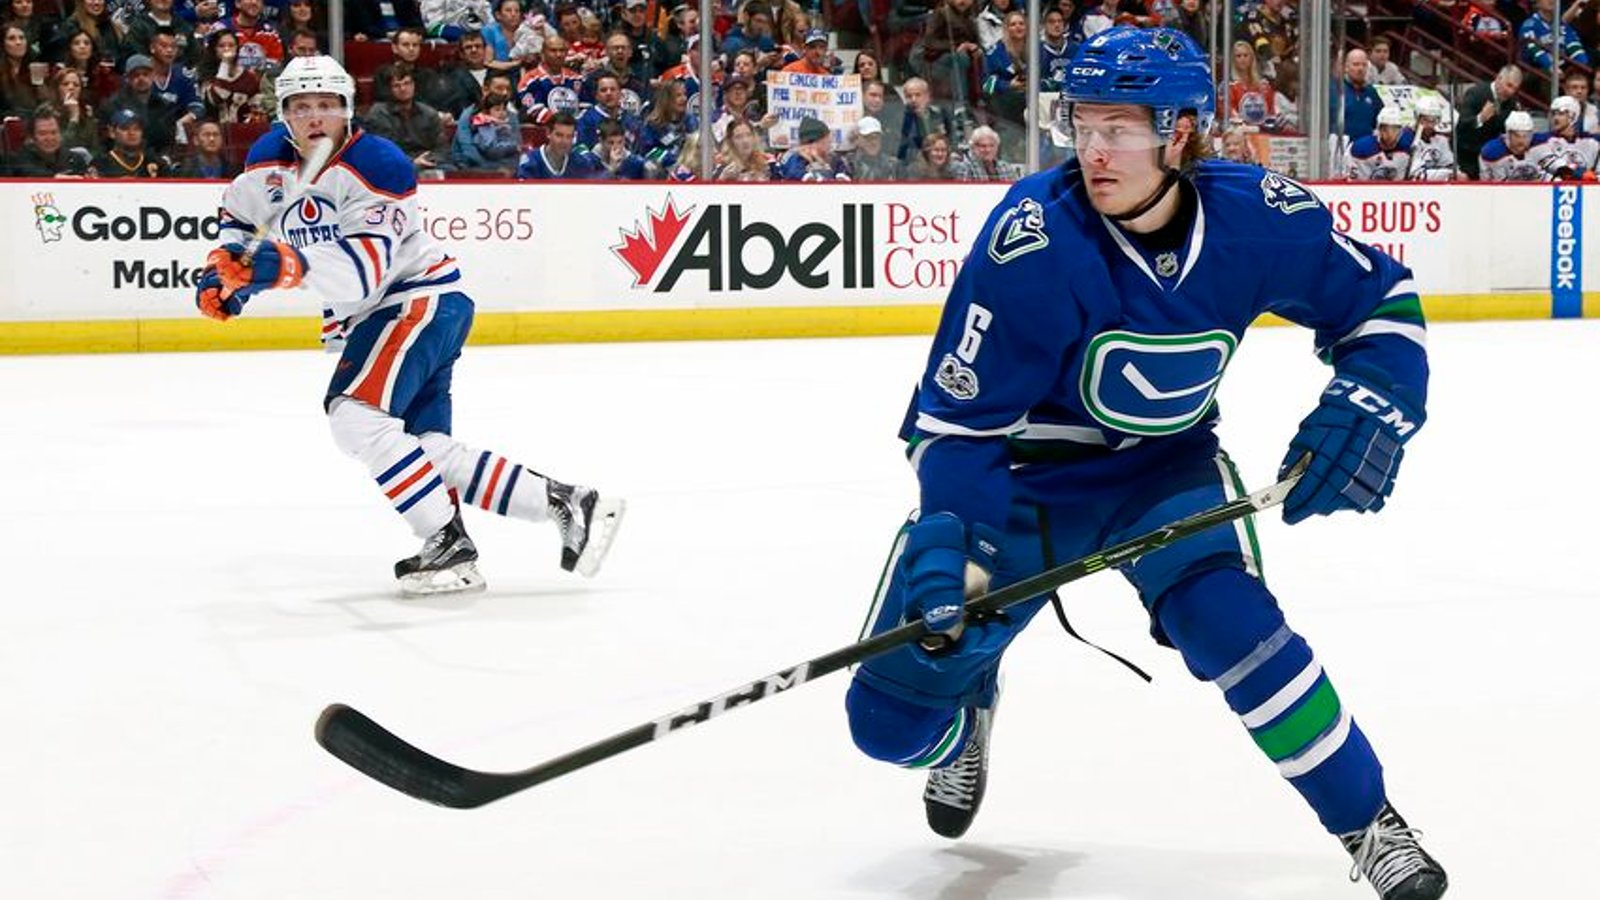 Boeser named NHL rookie of month